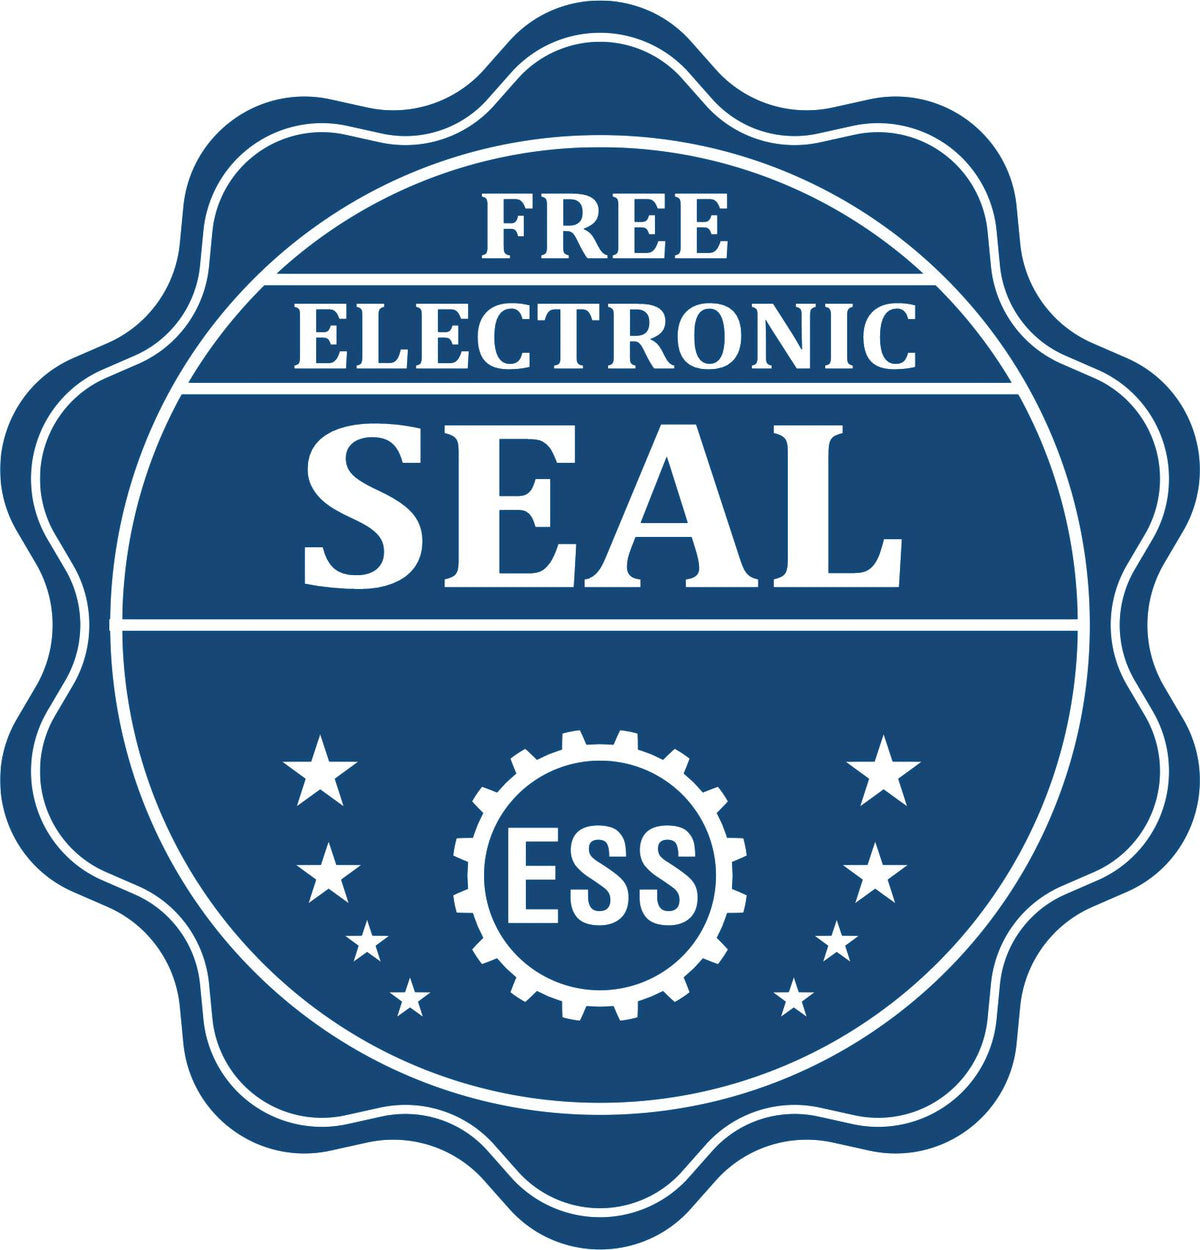 A badge showing a free electronic seal for the Heavy Duty Cast Iron Alaska Architect Embosser with stars and the ESS gear on the emblem.